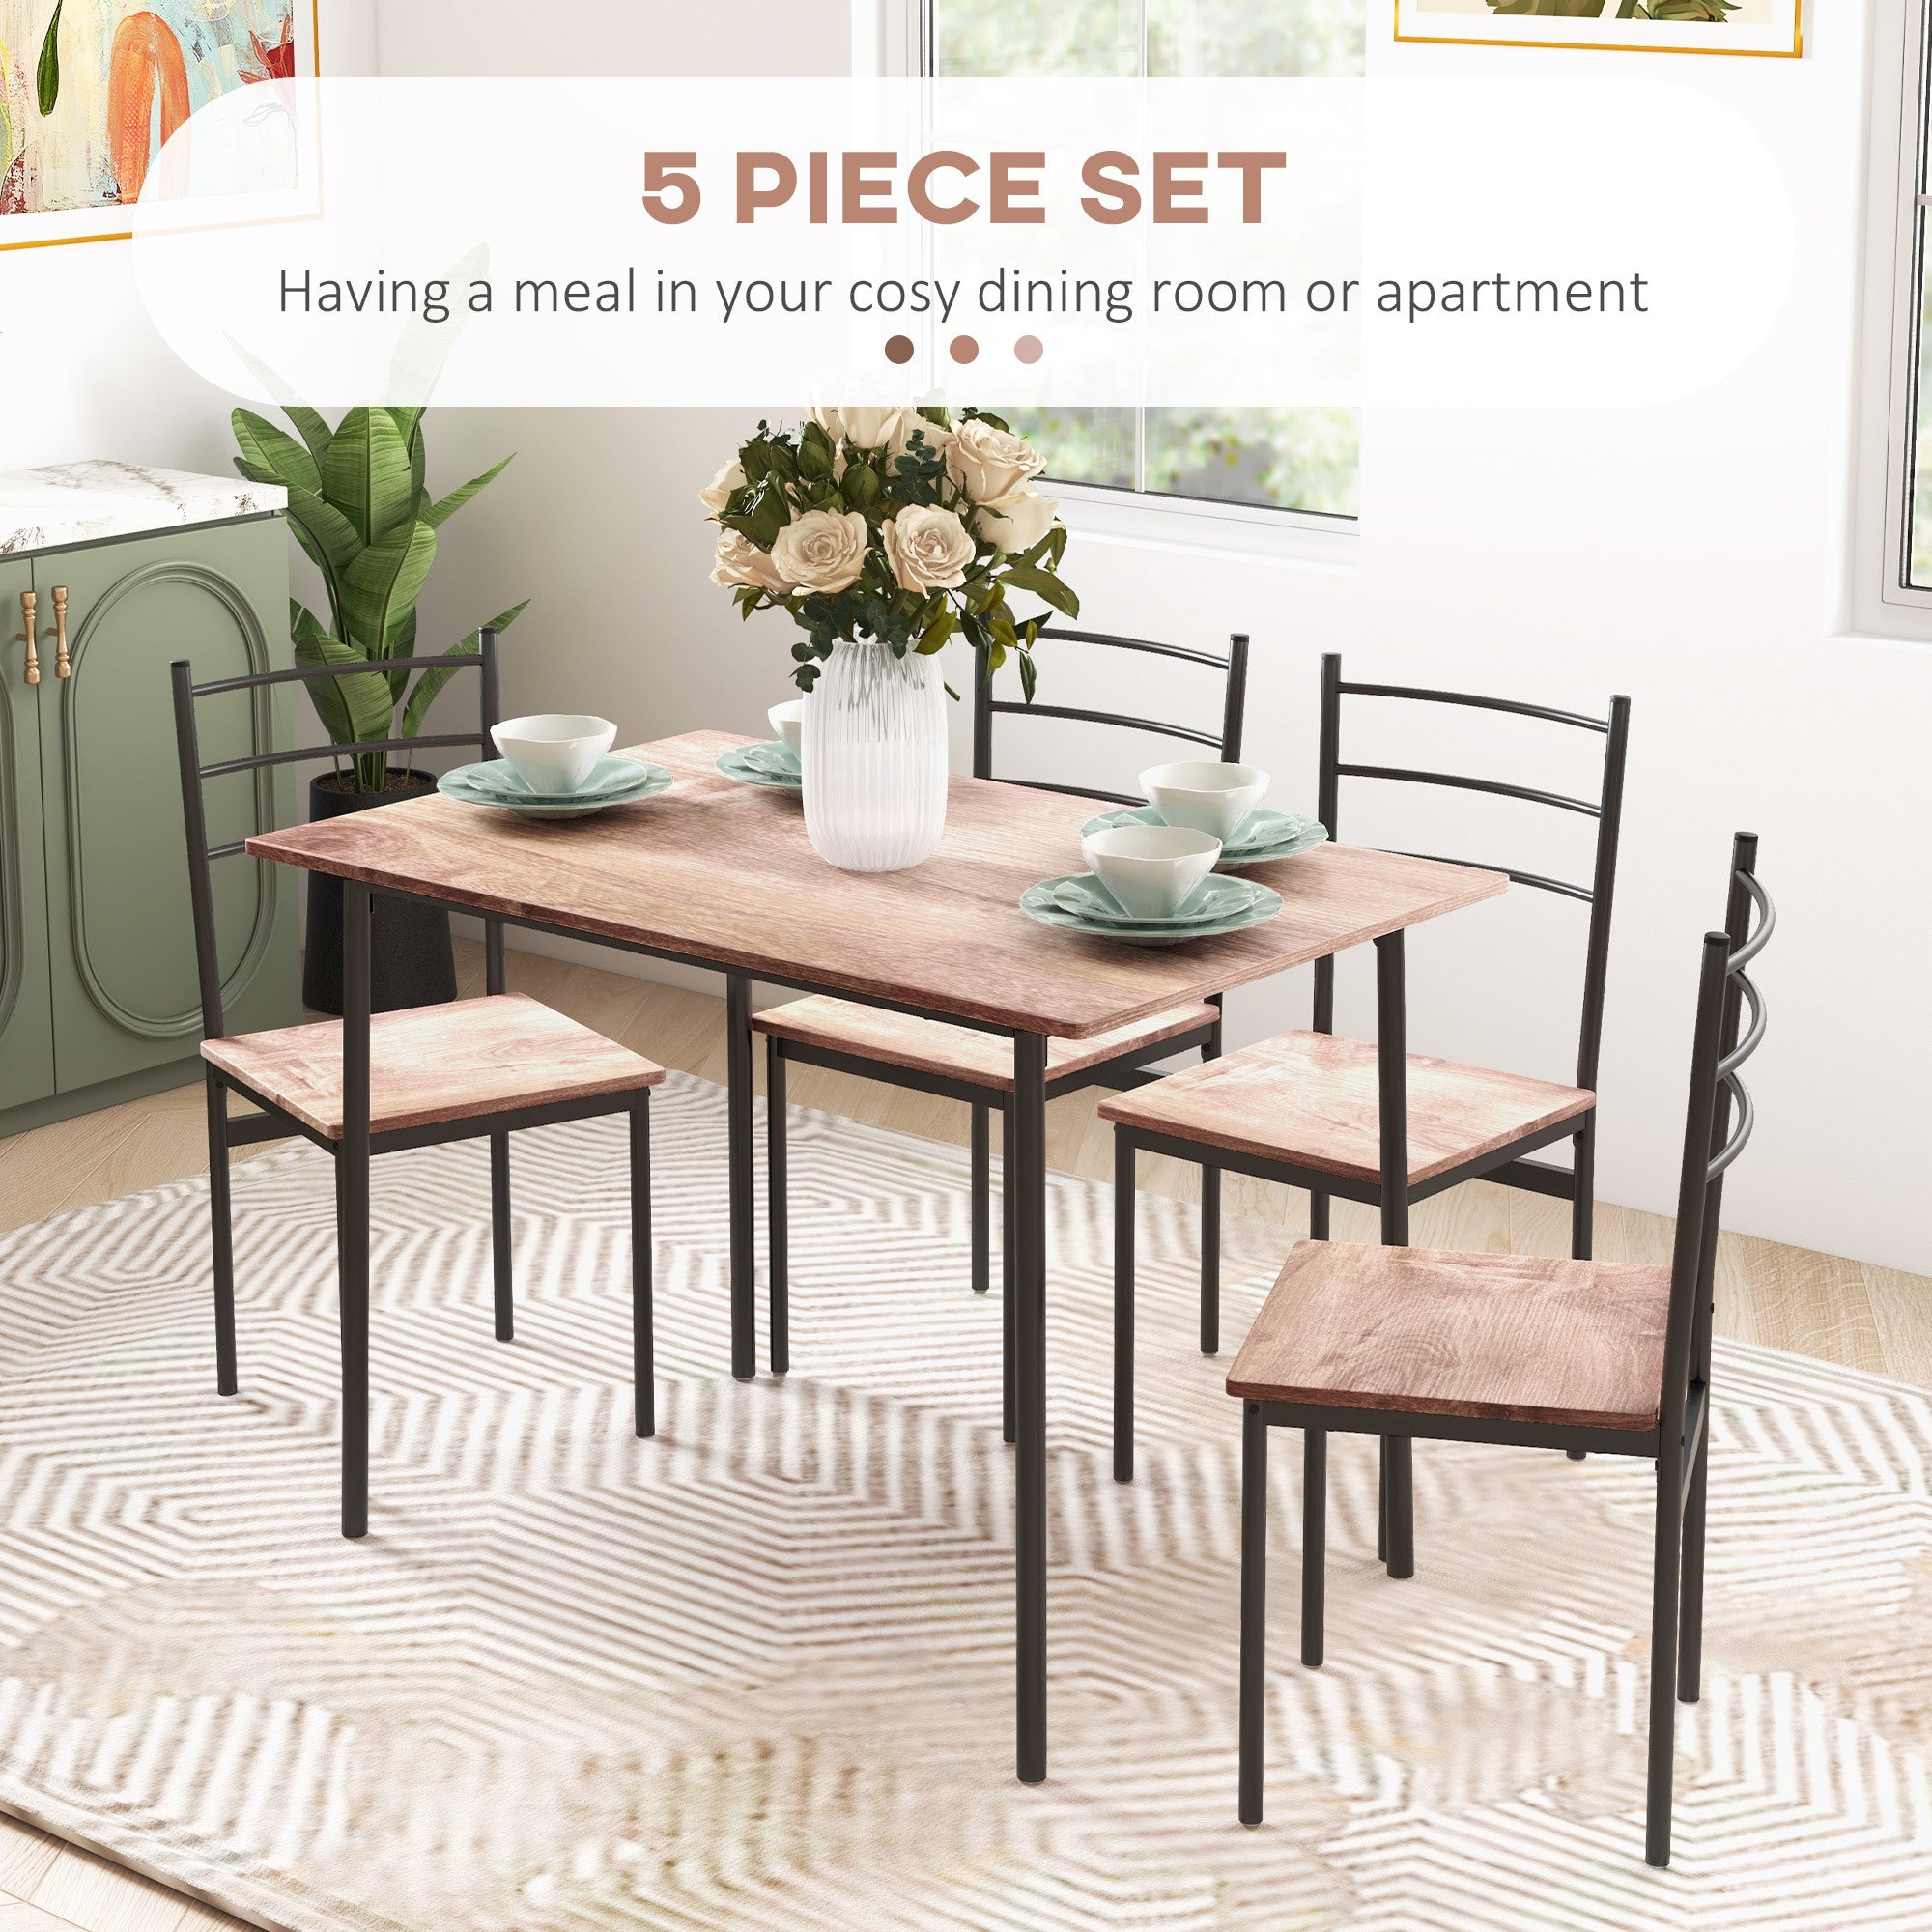 HOMCOM 5 Piece Dining Room Table Set for 4, Space brown-mdf